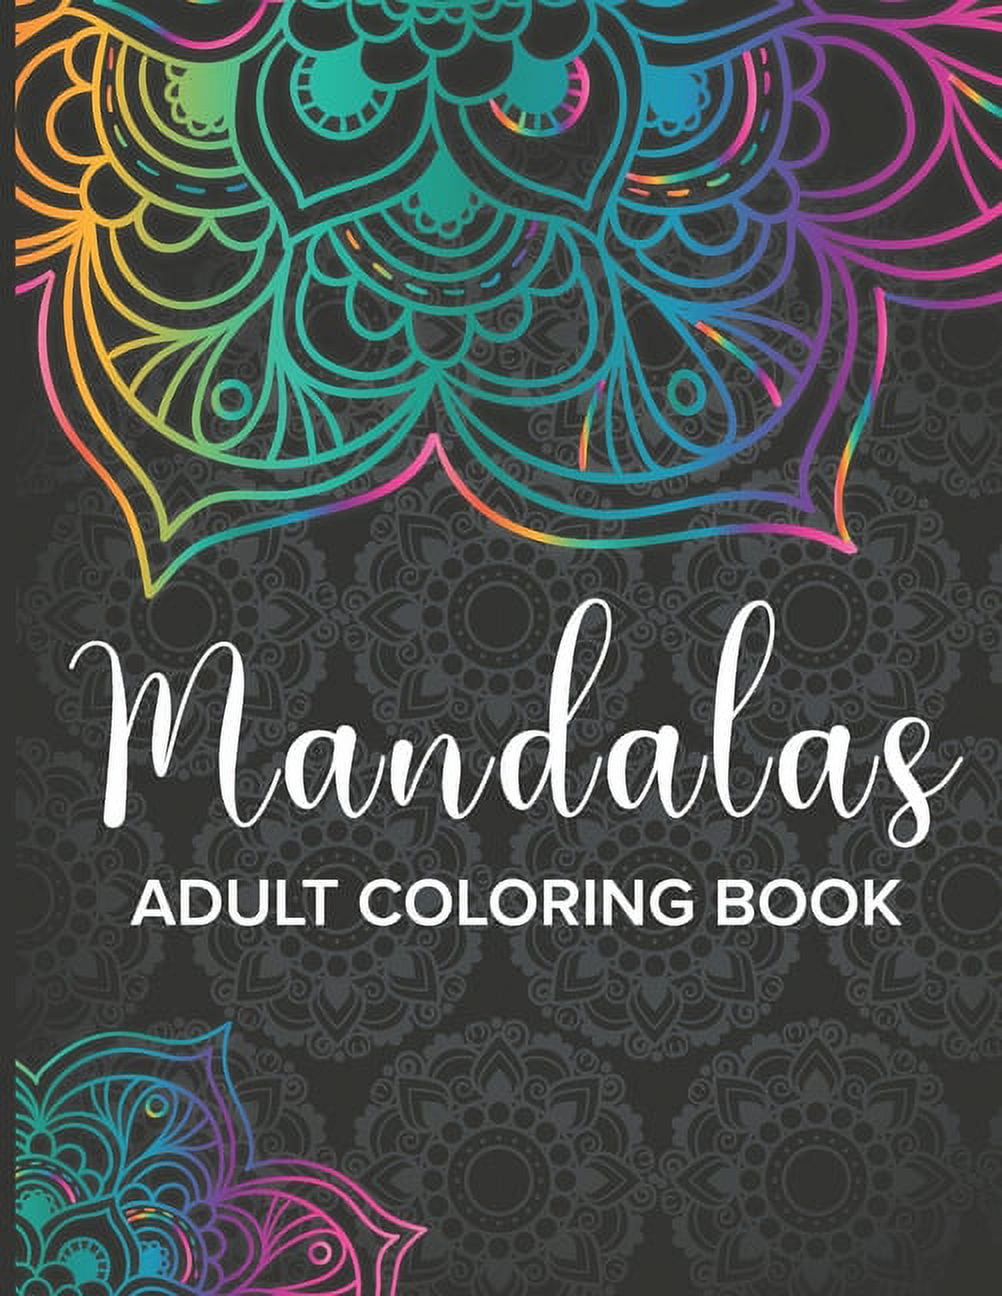 The Art of Mandala: Adult Coloring Book Featuring Beautiful Mandalas  Designed to Soothe the Soul (Paperback)